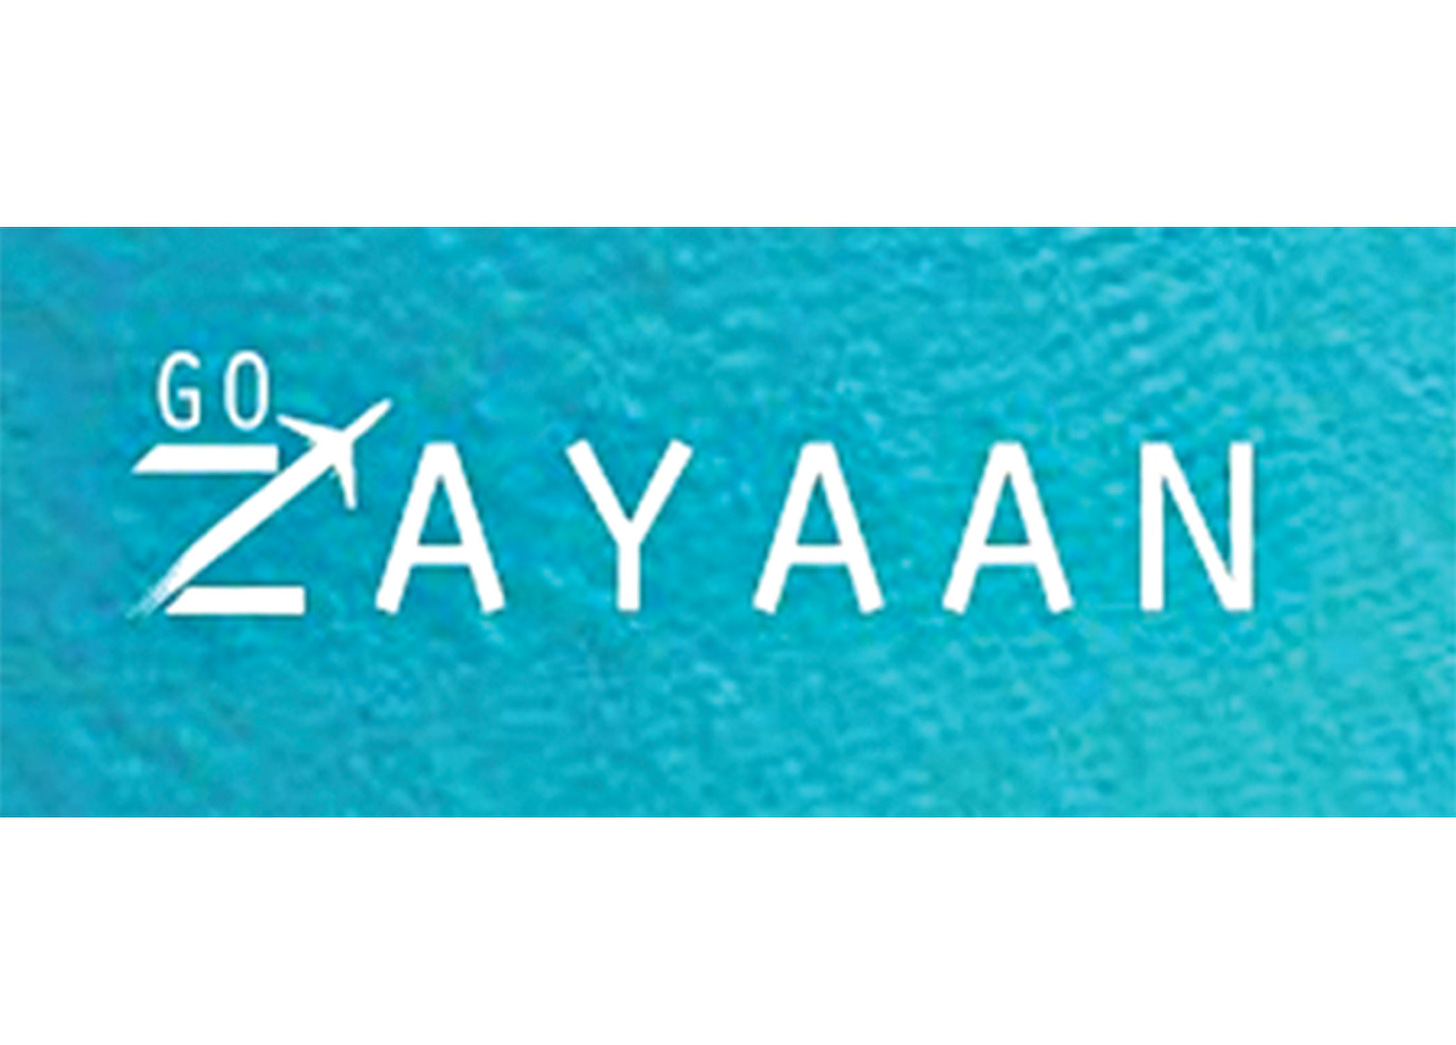 Go Zayaan raises $2.5m for expansion | The Daily Star